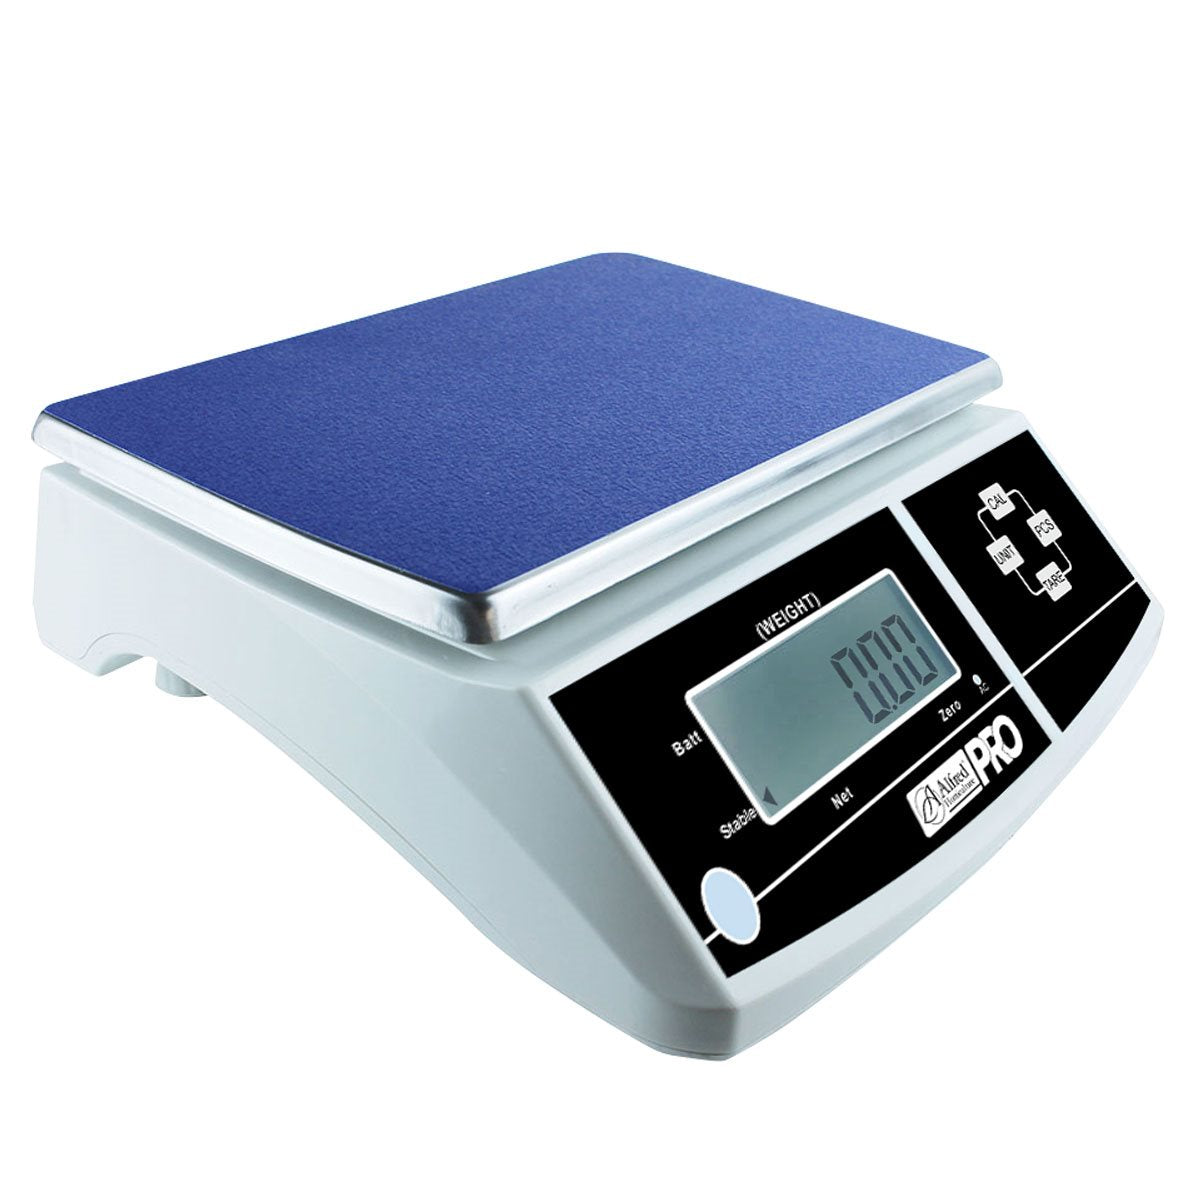 Product Secondary Image:Alfred PRO Commercial Scale 0.2grm - 6Kg SS Pan